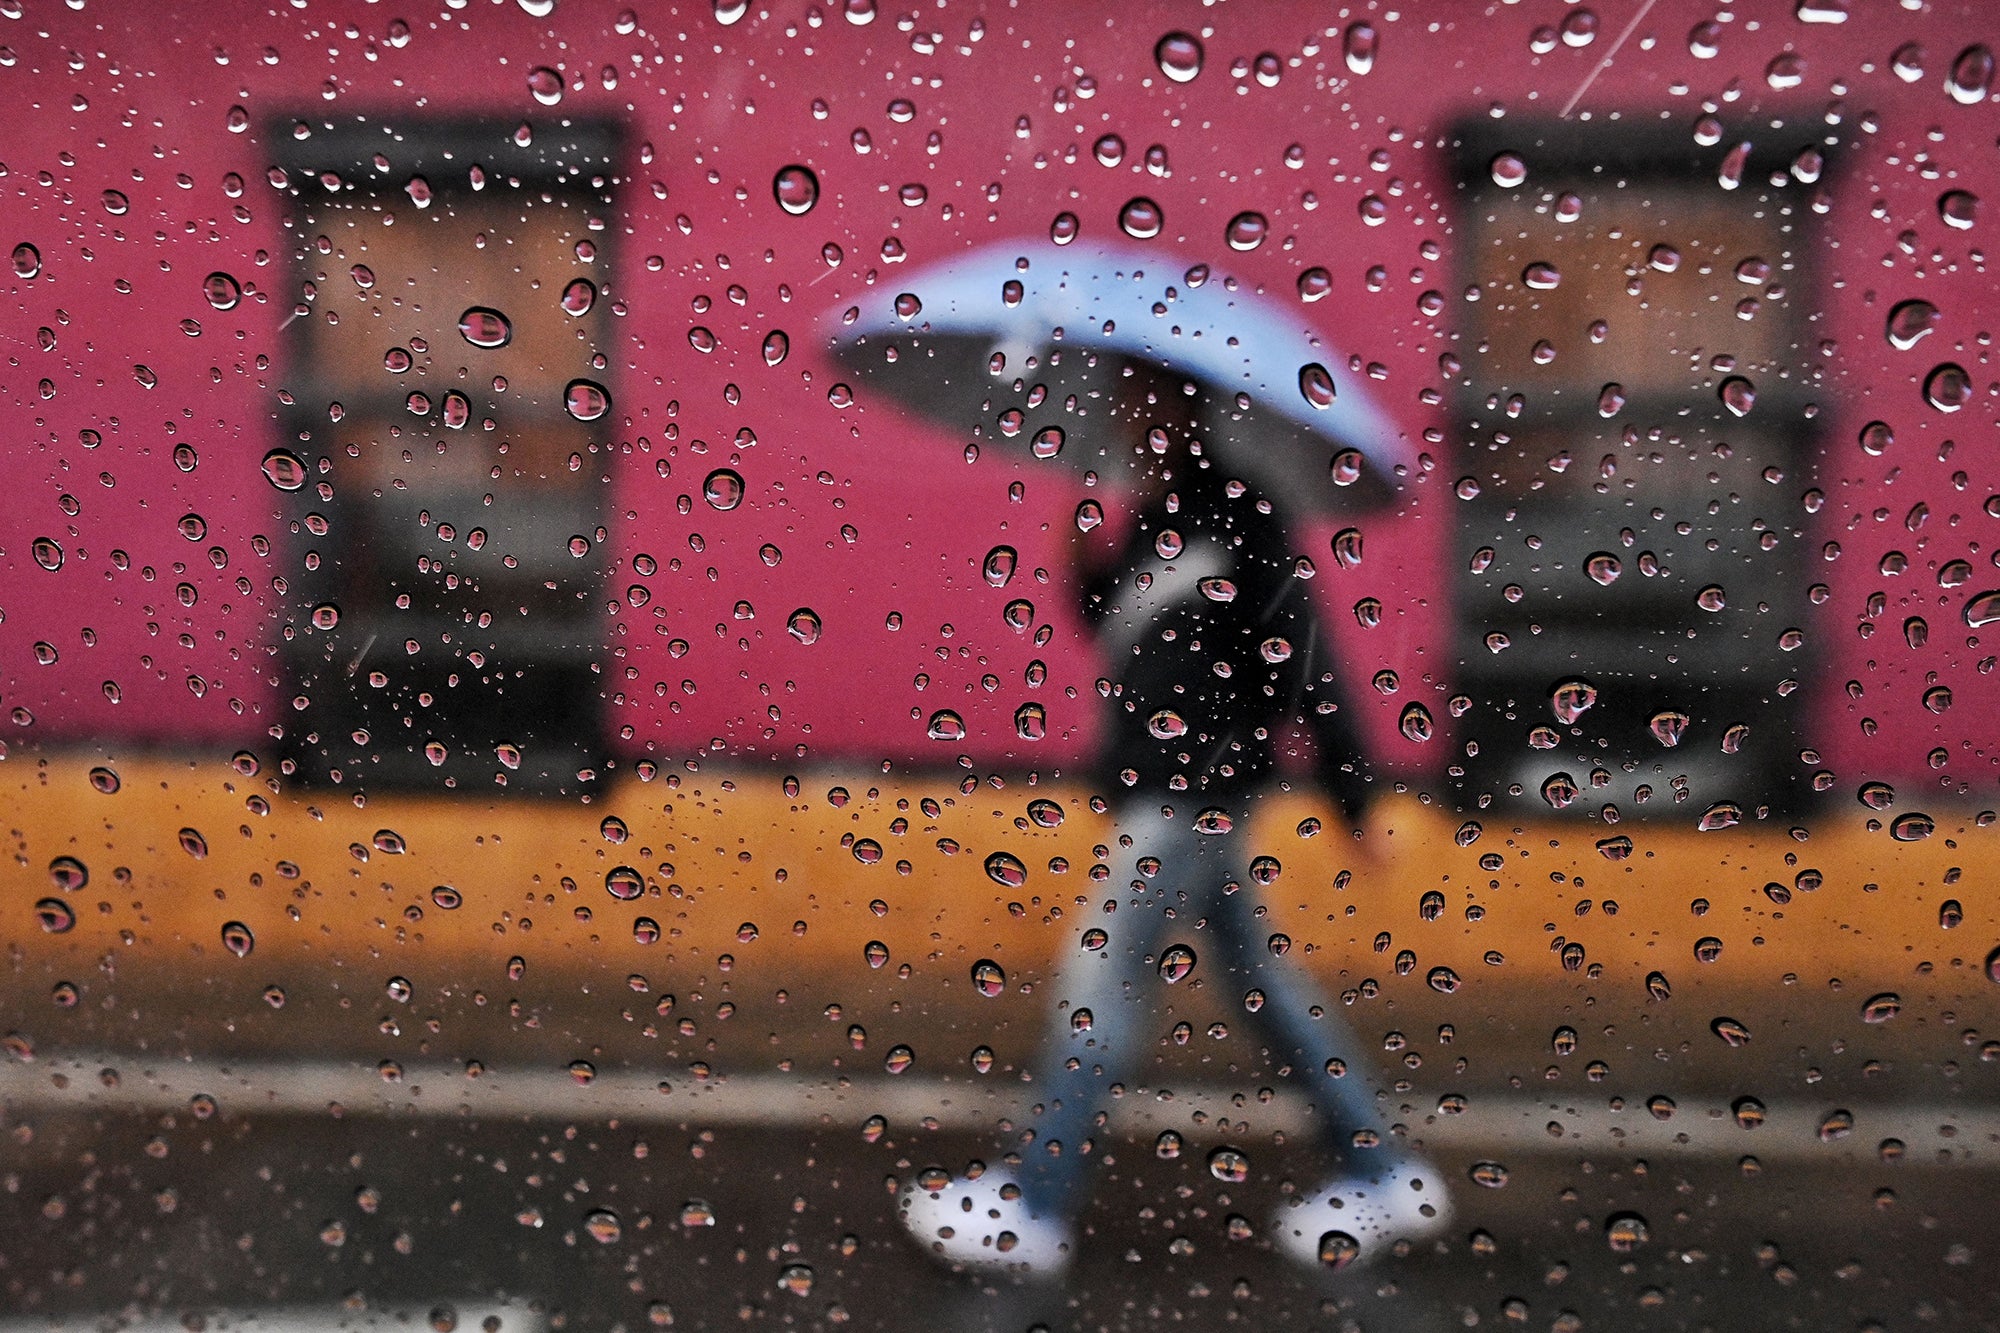 A photograph focused on water droplets on a window, blurry in the background, a man walks holding an umbrella under the rain in front of a pink and yellow wall